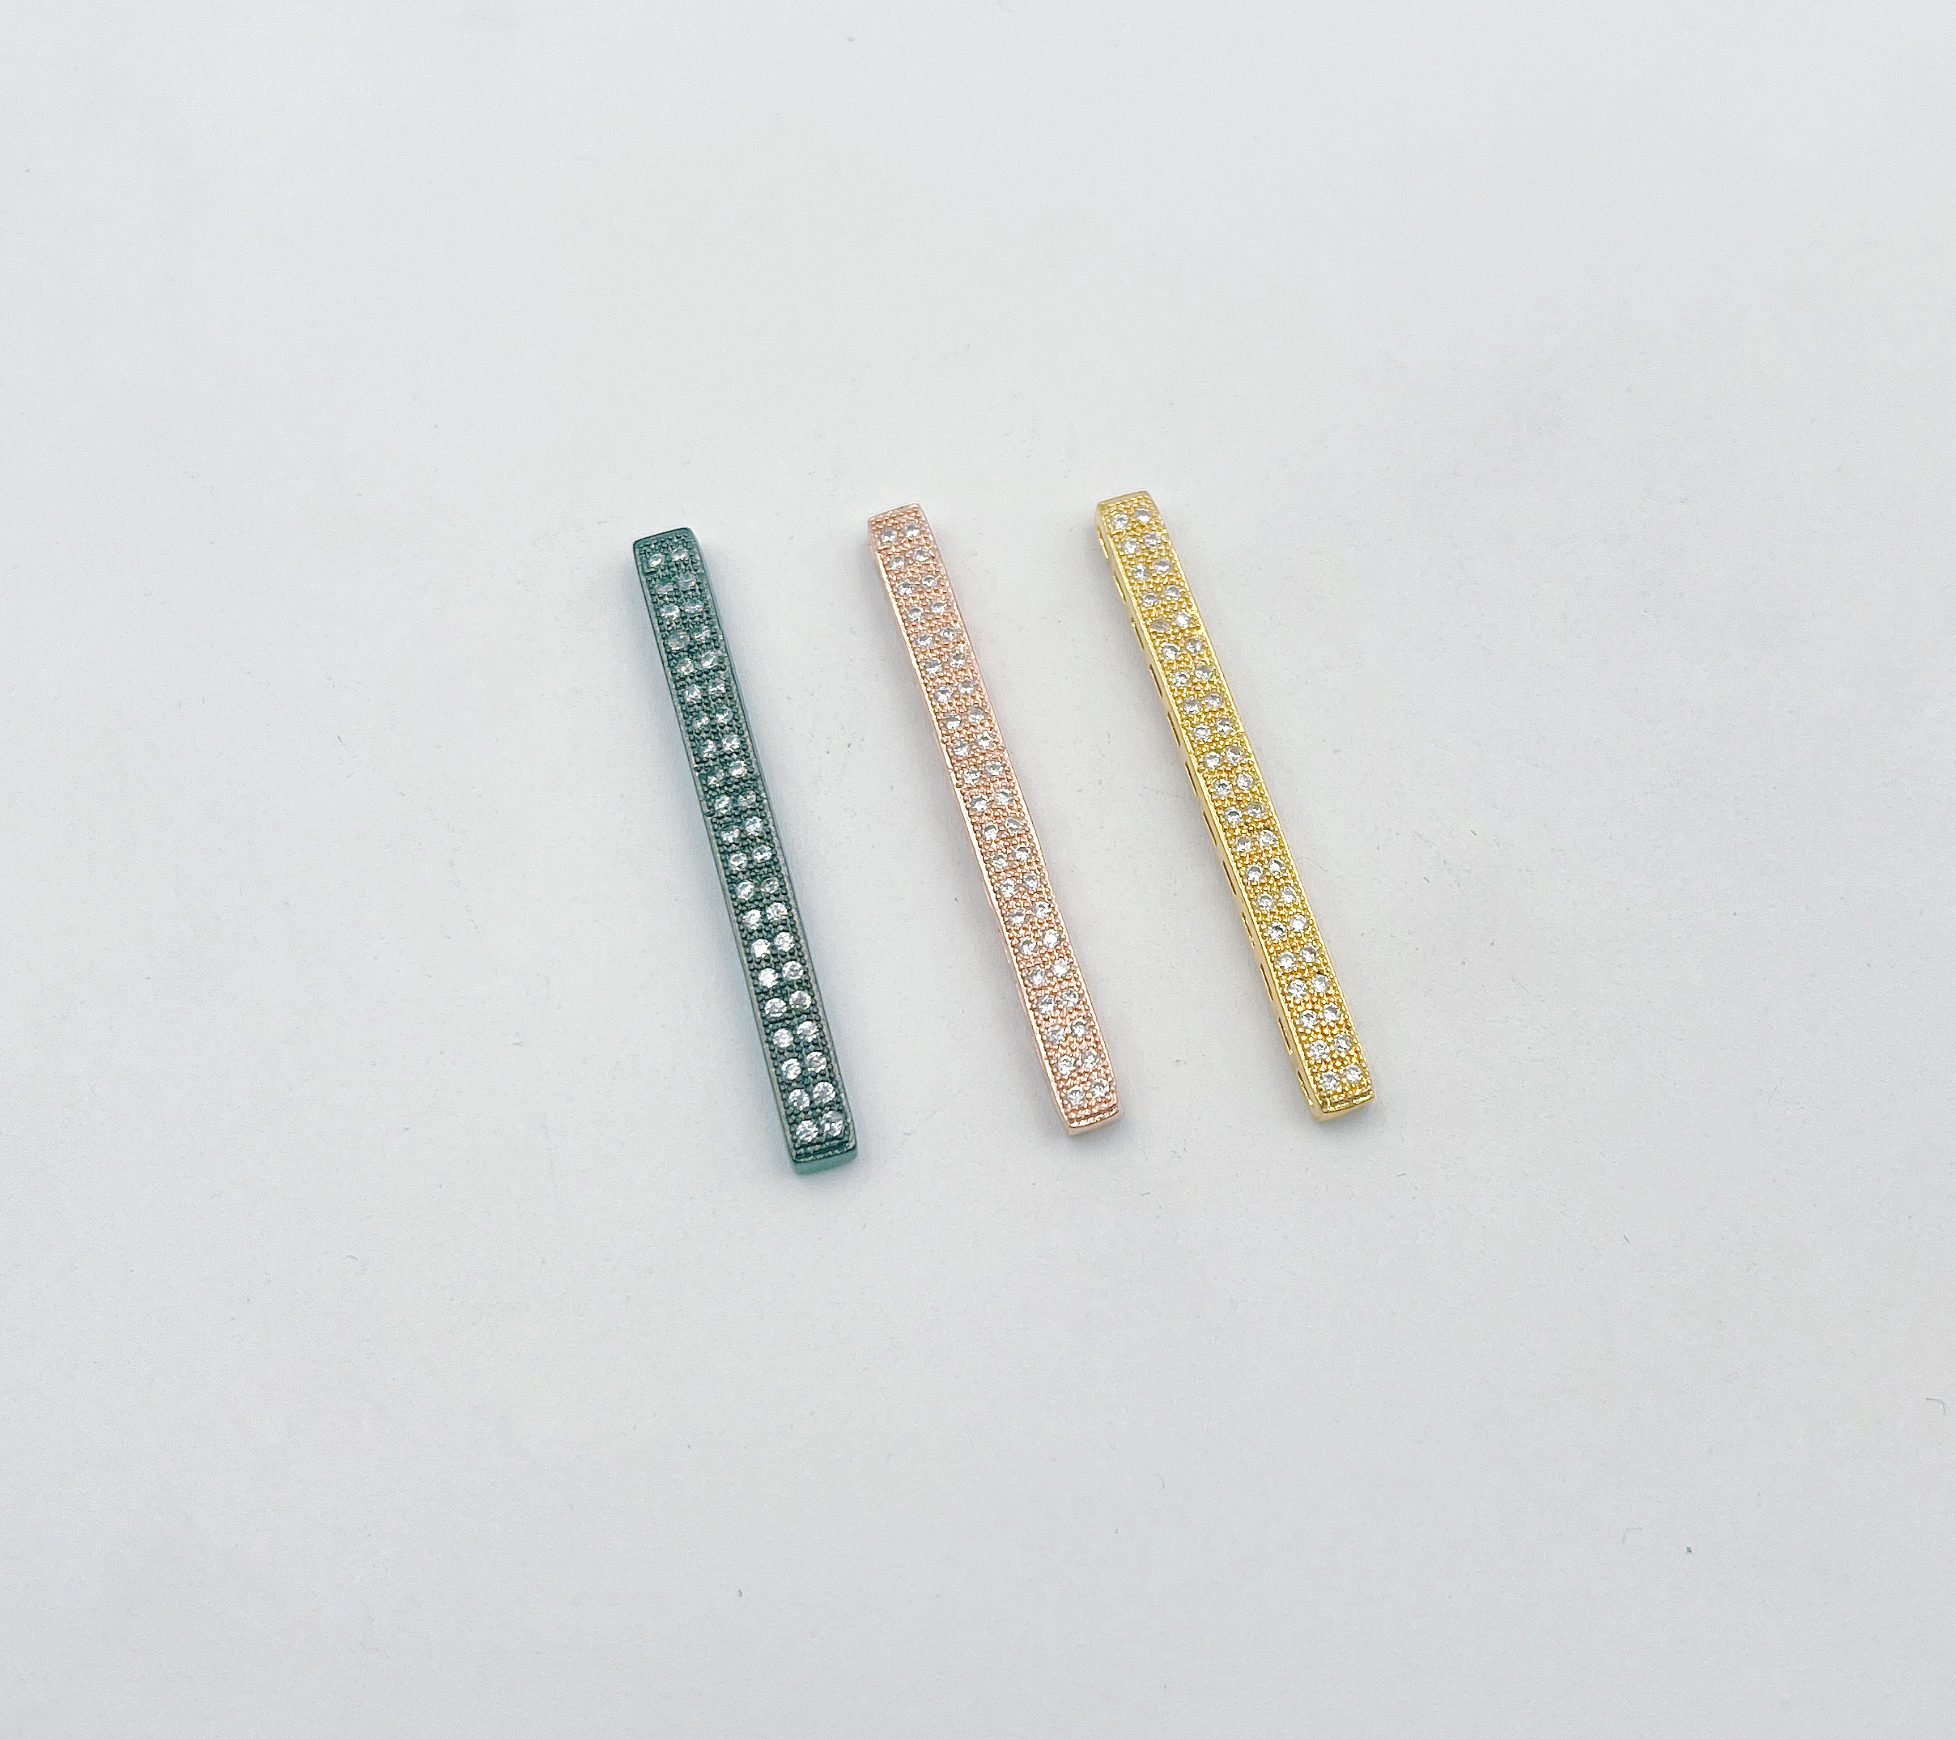 12 Gold Separator Bars 4 Hole Multi Strand Divider Row Connector 21mm x 2mm End Bar for Bracelets Necklaces G6m4 6mm between 1mm Holes